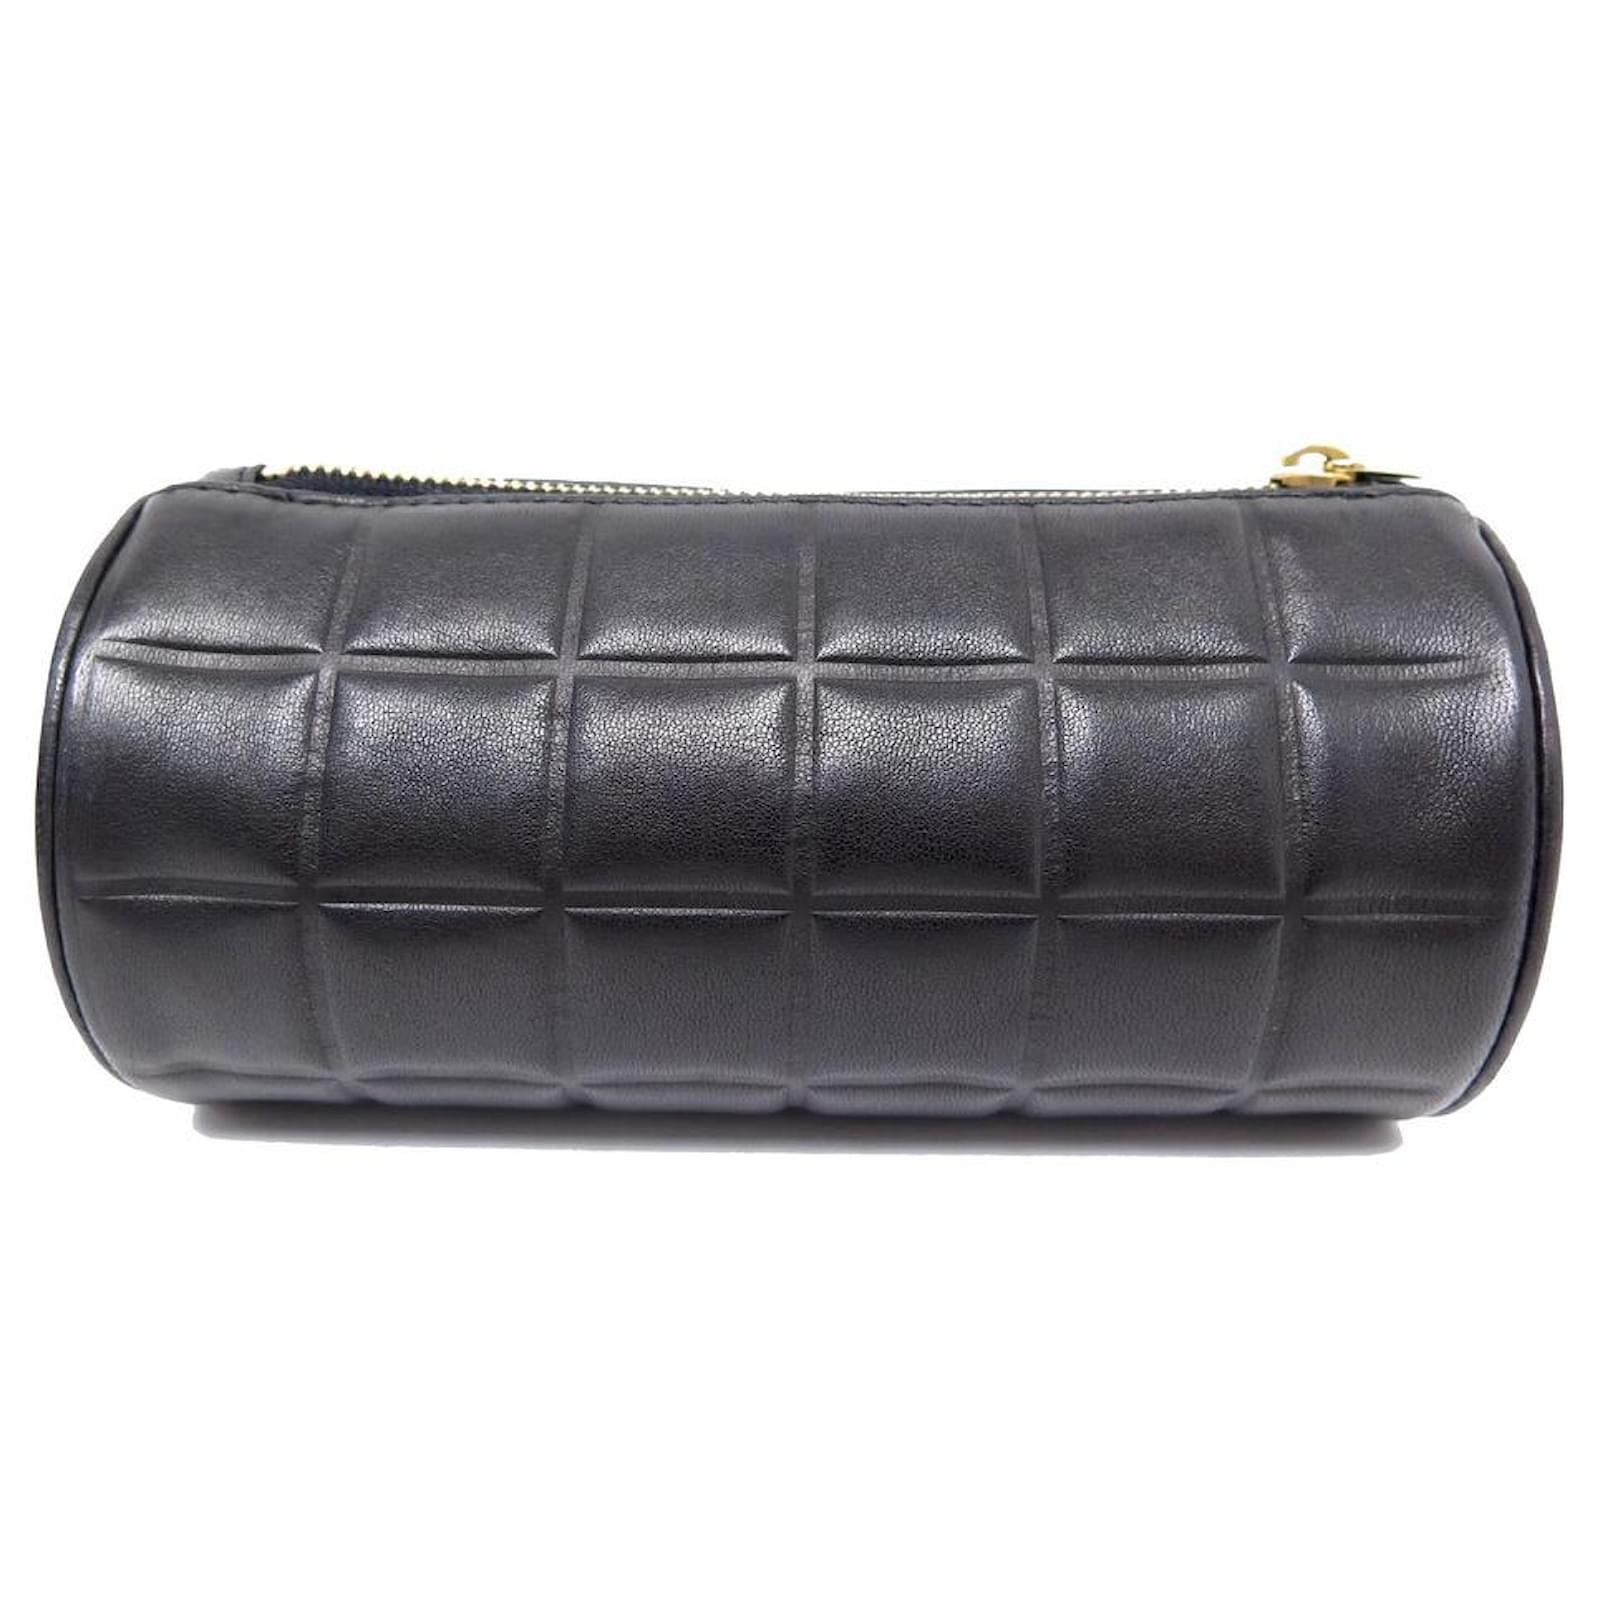 Clutch Bags Chanel New Chanel Pouch in Black Quilted Leather Logo CC Chocolate Bar Leather Round